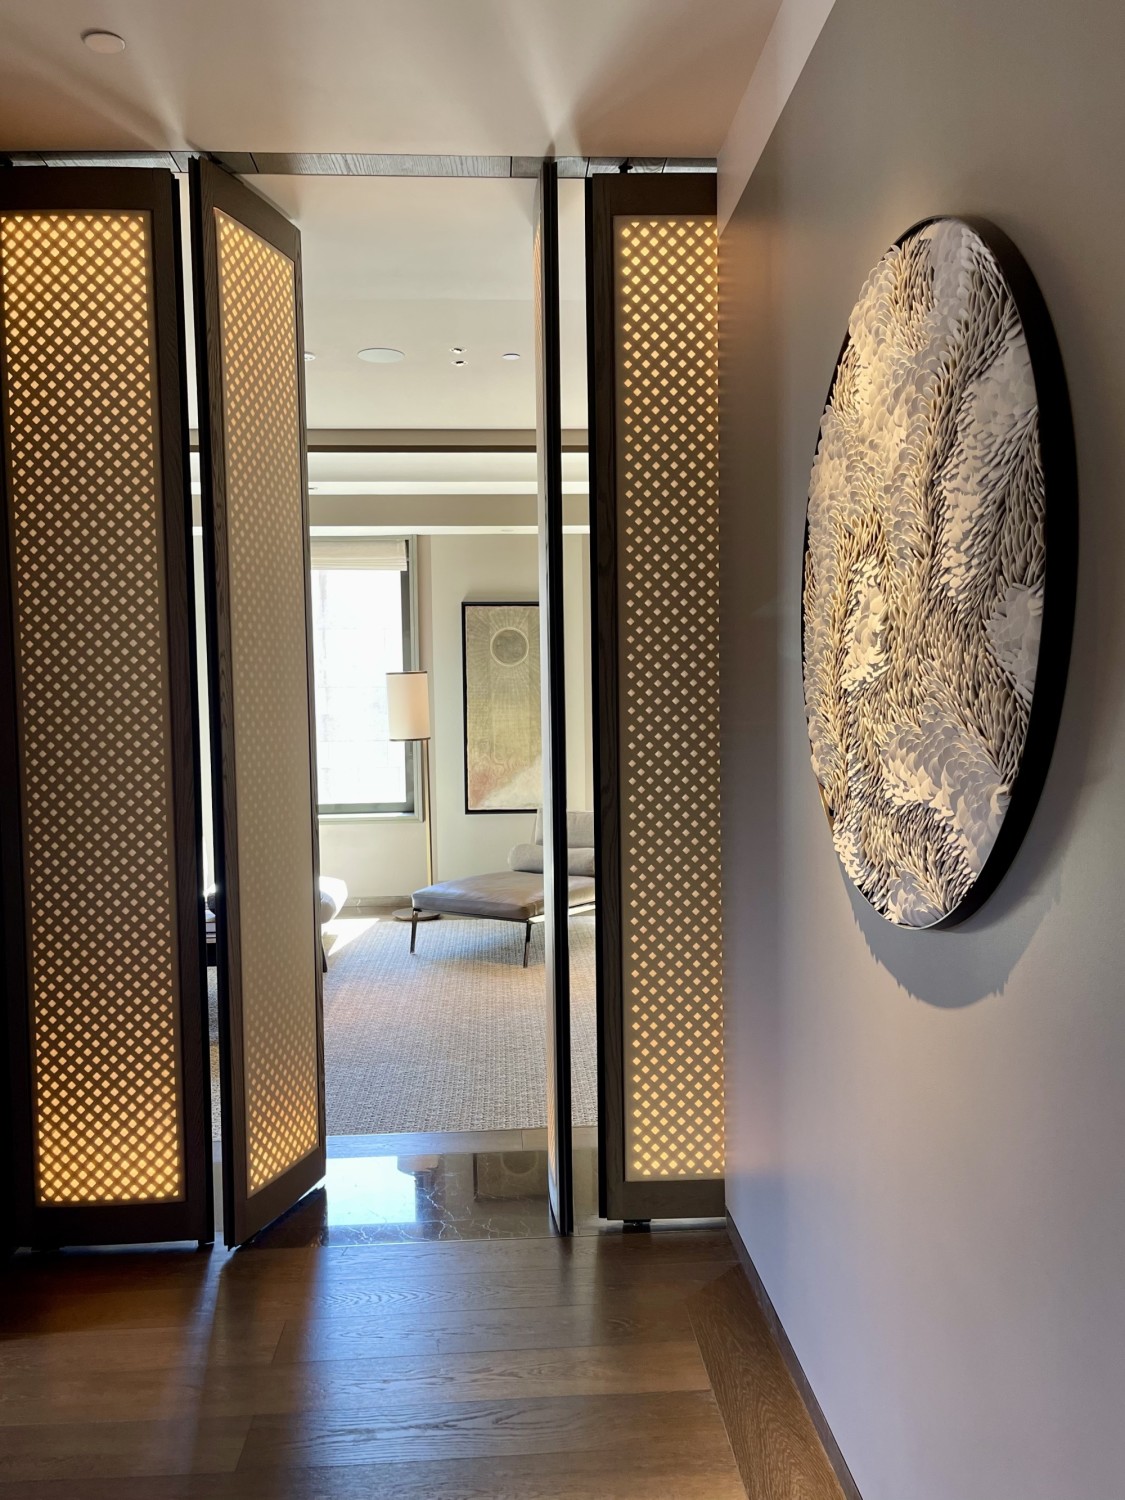 A hallway with an open door that gives a peak inside one of the hotel rooms.